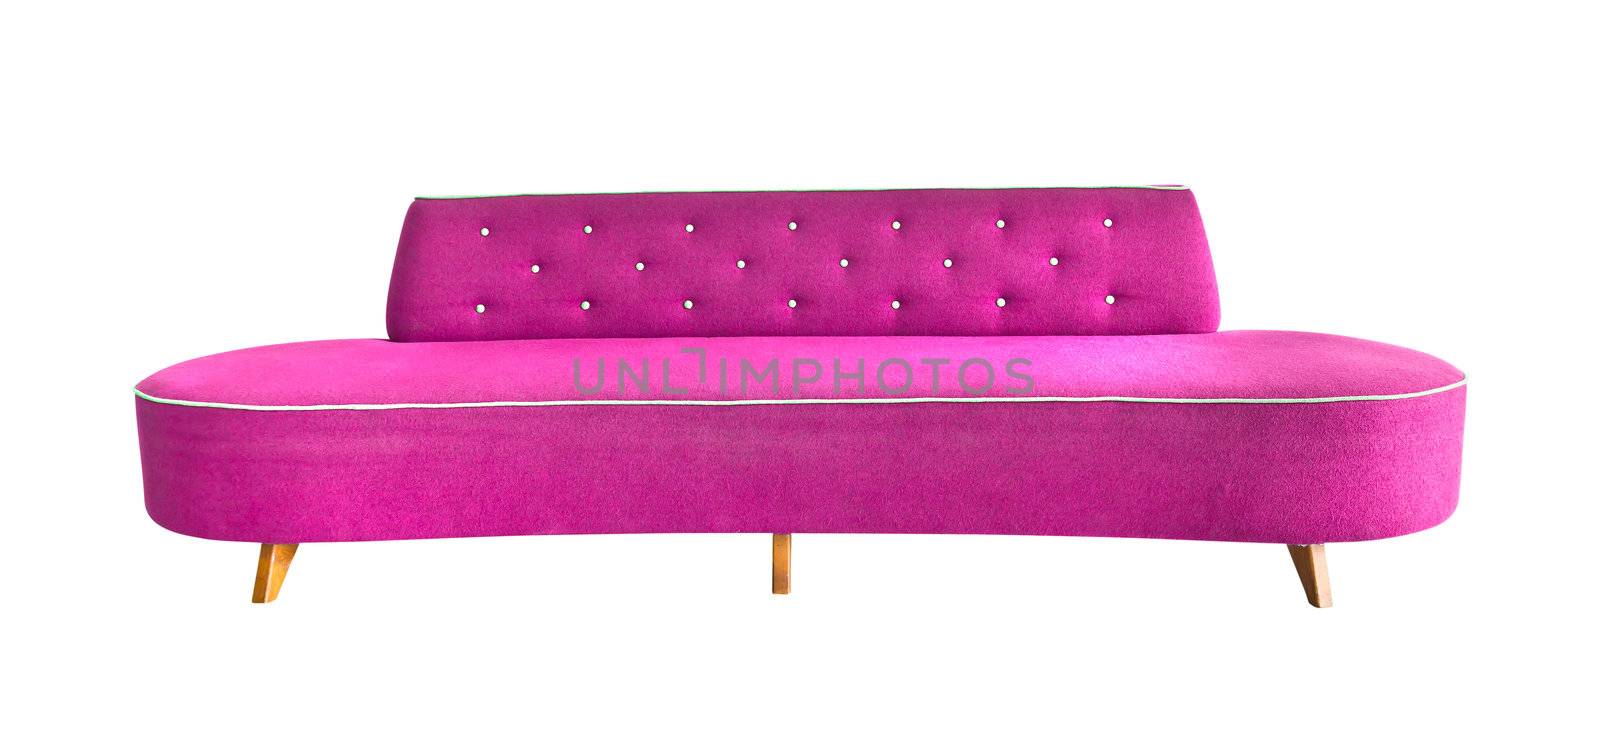 pink sofa isolated with clipping path by tungphoto